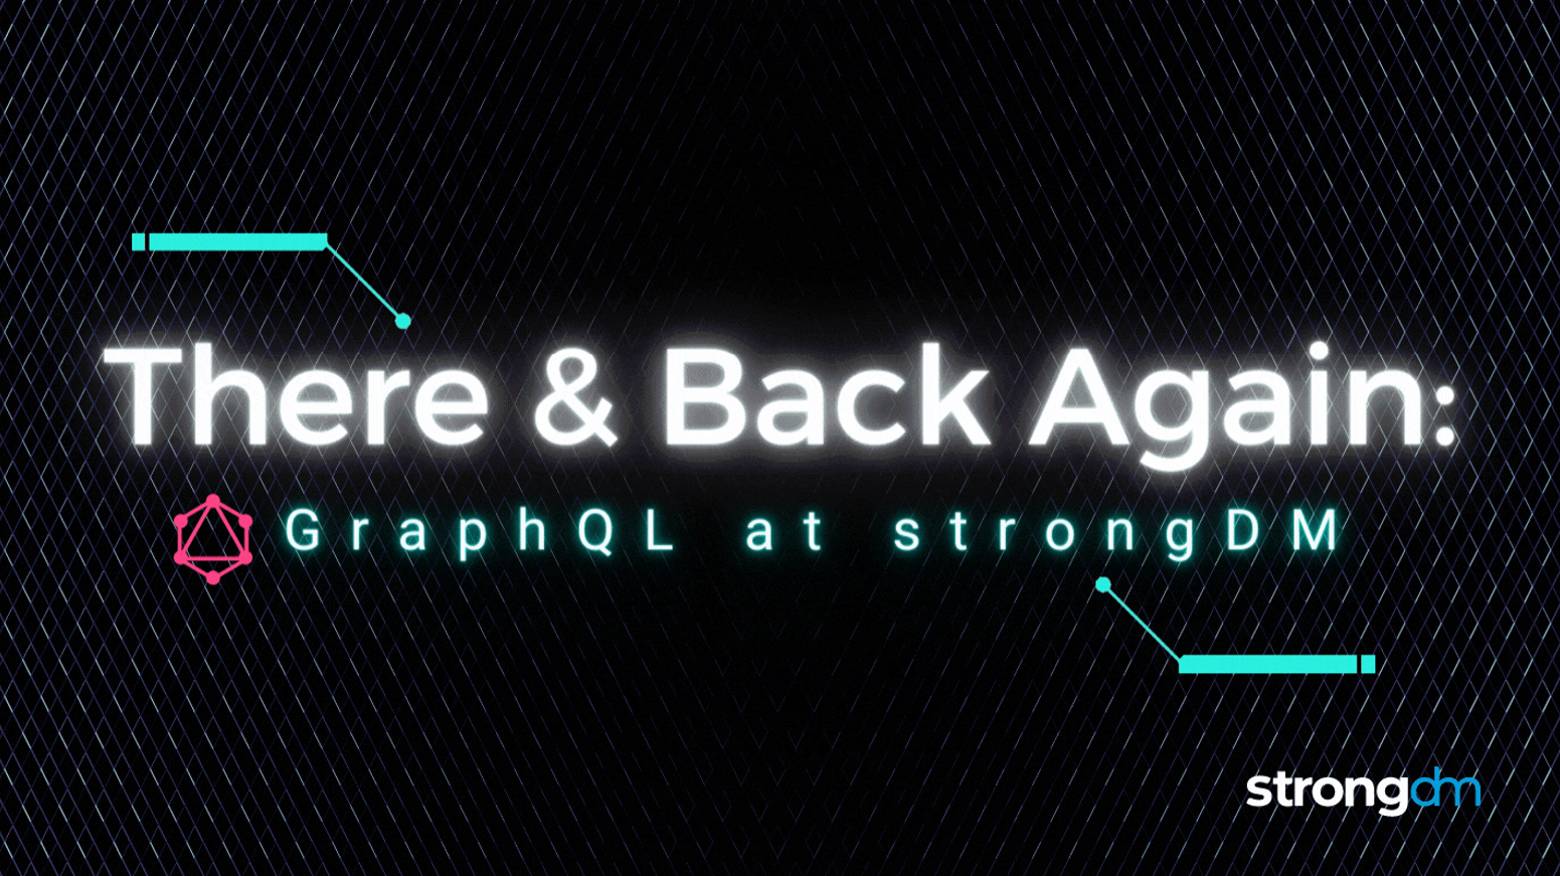 There and Back Again: GraphQL at StrongDM